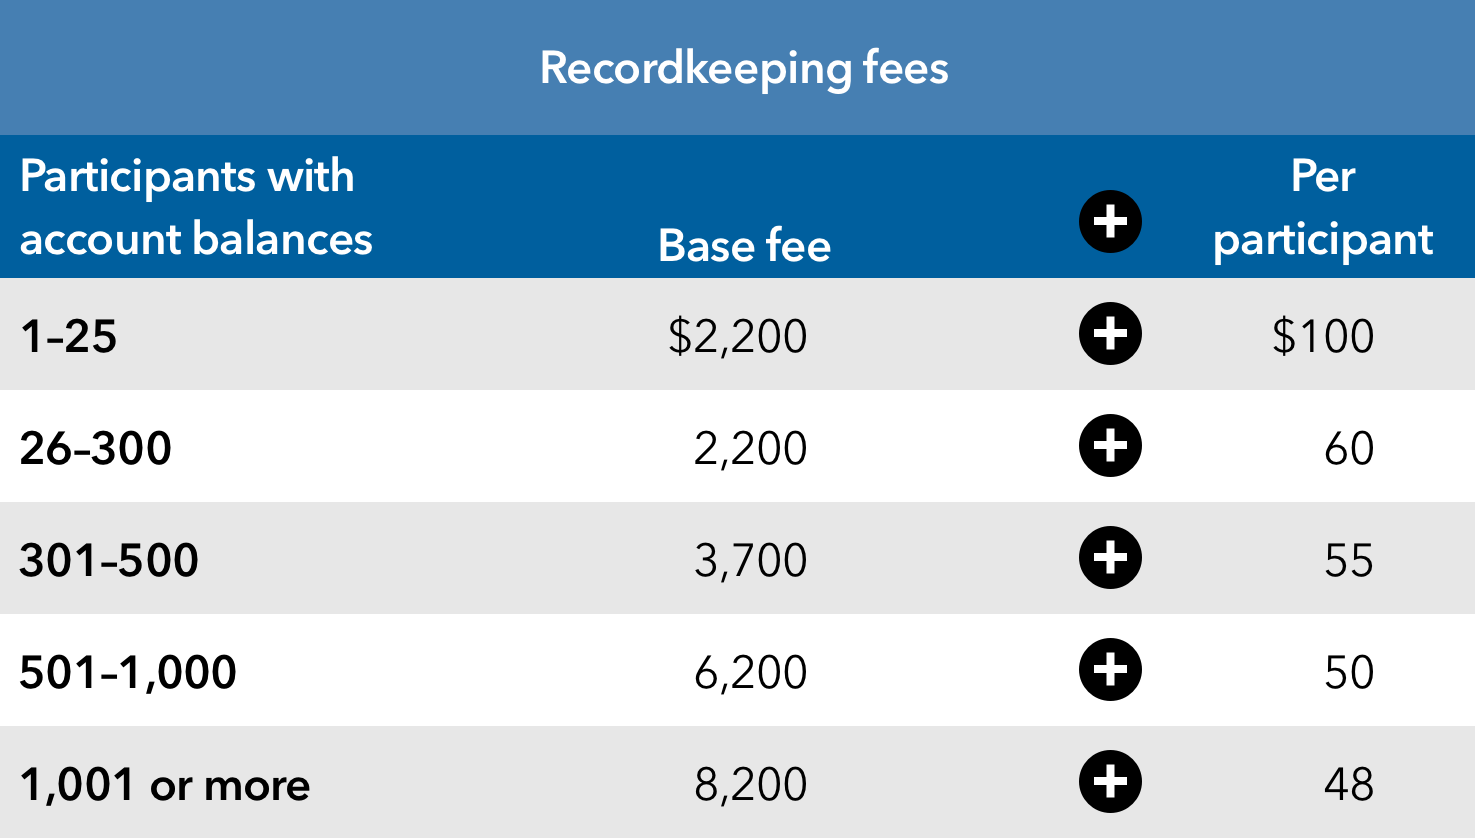 This chart displays how record-keeping fees are determined. The first column shows the number of participants with account balances. The second and third columns display the base fee, dependent on whether it’s a PlanPremier T P A as shown in the second column, or PlanPremier Bundled as shown in the third column. The fourth column lists the cost per participant. So, the base fee would be based on the total number of participants, plus another fee per participant. In this chart, the figures are as follows: For 1 to 25 participants with account balances, a base fee of $2,200 for the PlanPremier T P A or $5,400 for the PlanPremier Bundle plus $100 per participant would provide you with the total record-keeping fee.  For 26 to 300 participants with account balances, a base fee of $2,200 for the PlanPremier T P A or $5,400 for the PlanPremier Bundle plus $60 per participant would provide you with the total record-keeping fee.  For 301 to 500 participants with account balances, a base fee of $3,700 for the PlanPremier T P A or $6,900 for the PlanPremier Bundle plus $55 per participant would provide you with the total record-keeping fee.  For 501 to 1000 participants with account balances, a base fee of $6,200 for the PlanPremier T P A or $9,650 for the PlanPremier Bundle plus $50 per participant would provide you with the total record-keeping fee.  For 1,001 or more participants with account balances, a base fee of $8,200 for the PlanPremier T P A or $11,650 for the PlanPremier Bundle plus $48 per participant would provide you with the total record-keeping fee. 